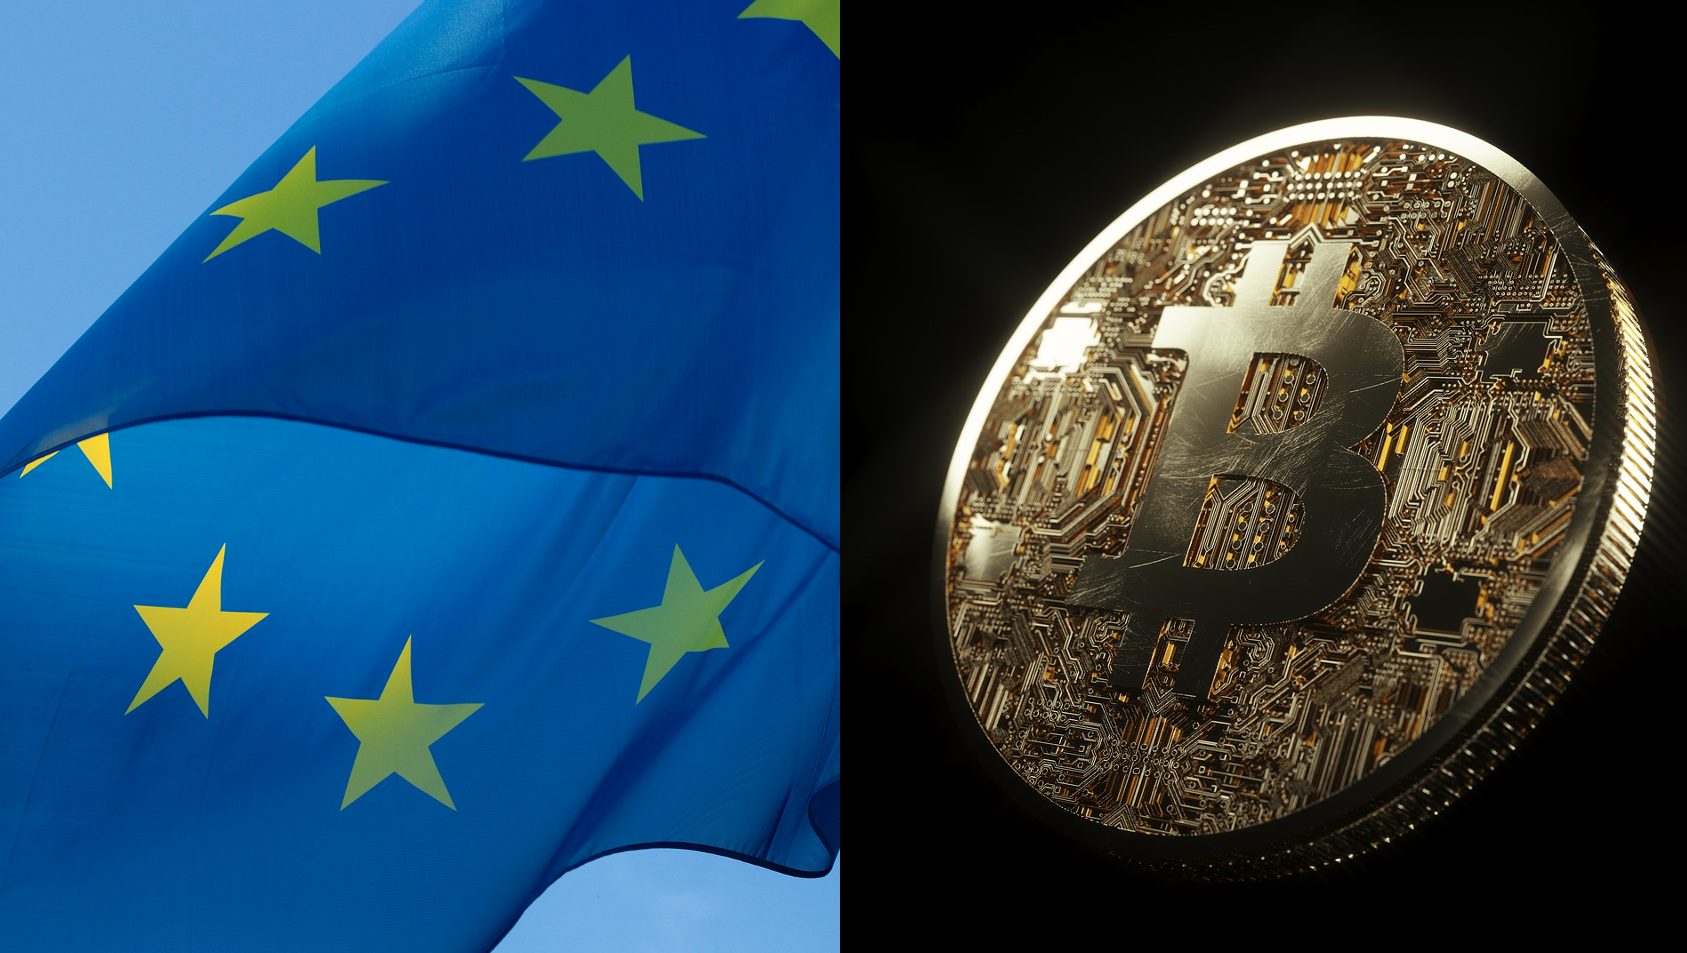 The EU fights money laundering by overseeing digital currencies